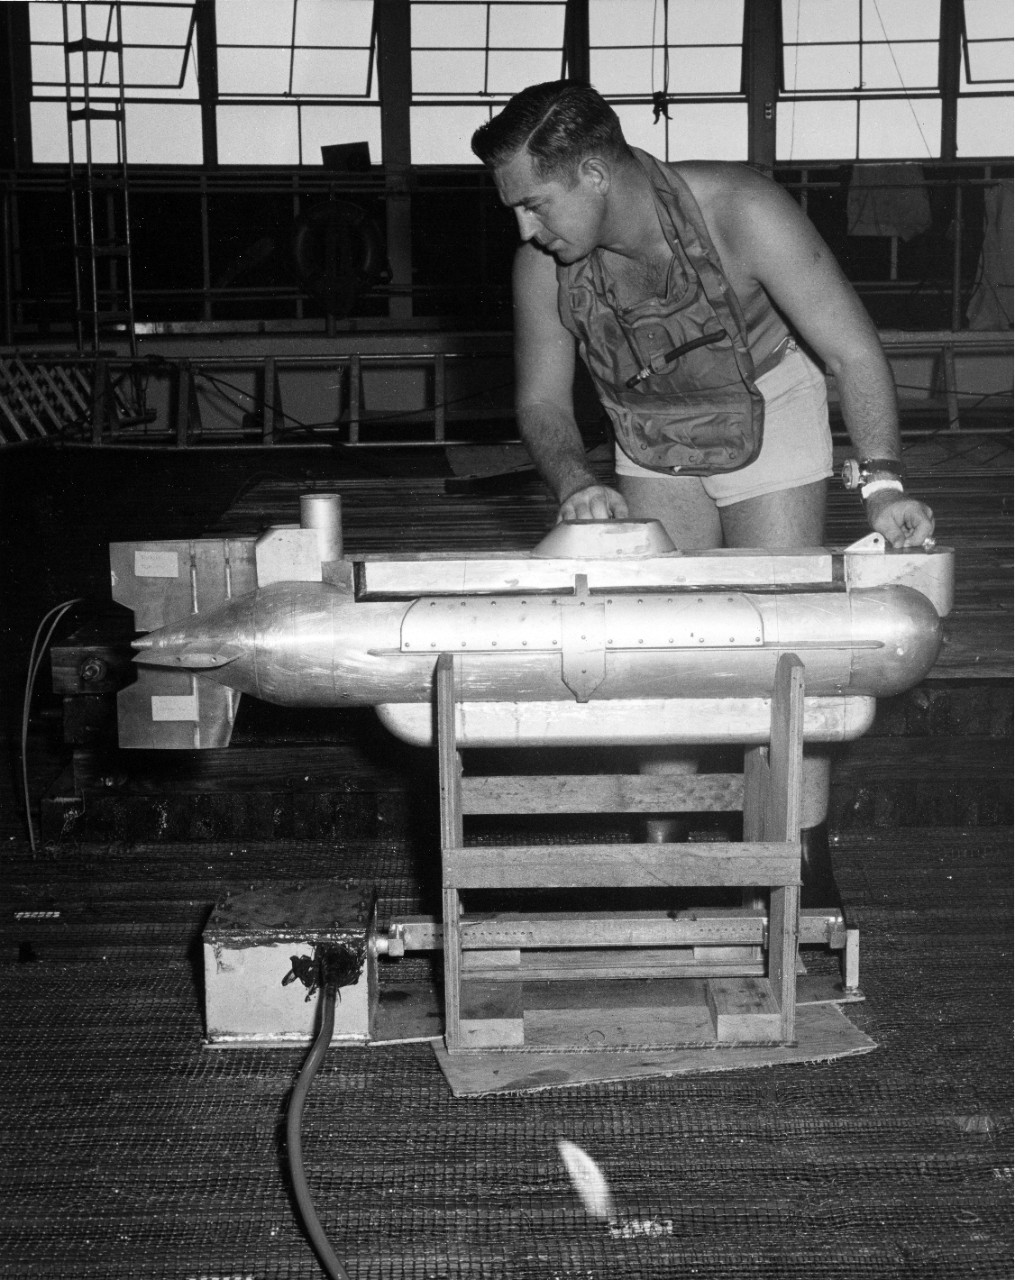 LT G.M. Brewer, USN, head of the Navy Underwater Photographic Team check as a scale model of the proposed deep water oceanographic submarine Aluminaut, during test conducted at the Naval Ordnance Laboratory, White Oaks, MD. June, 1959.